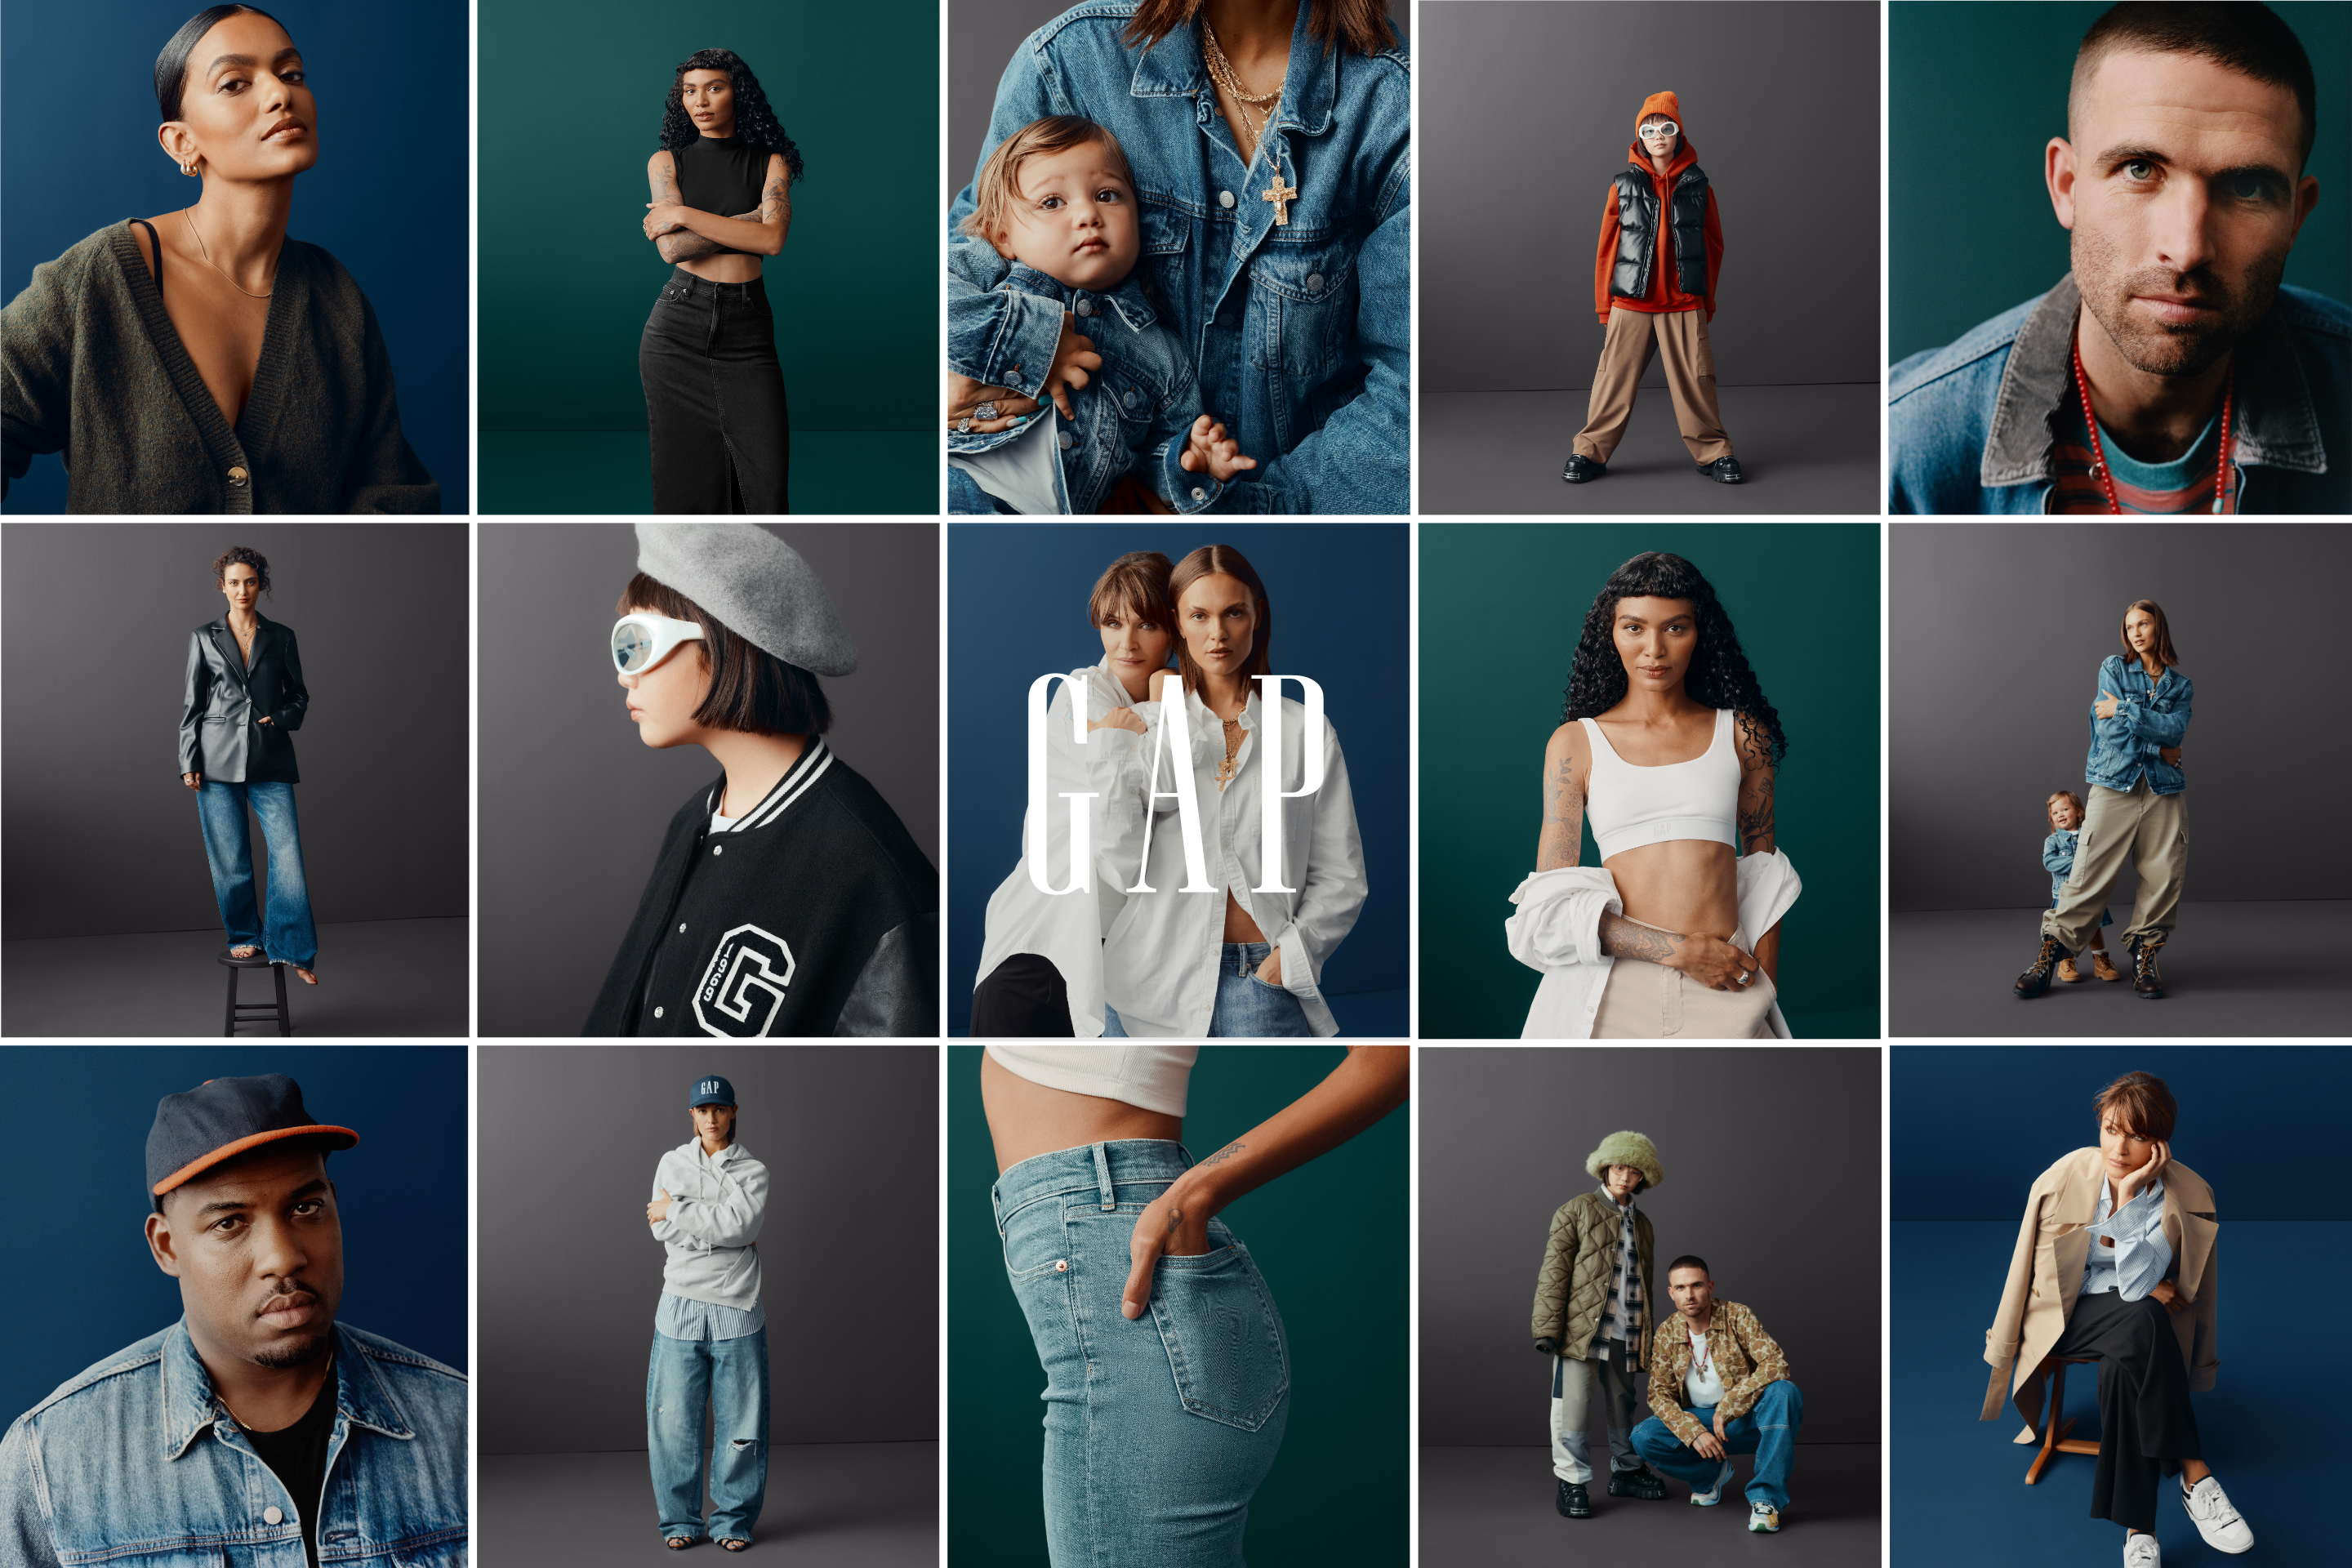 gap's fall collection and campaign is empowered by celebrites like Helena Christensen, Lionel Boyce, Veneda Carter, Sophia Roe, and more